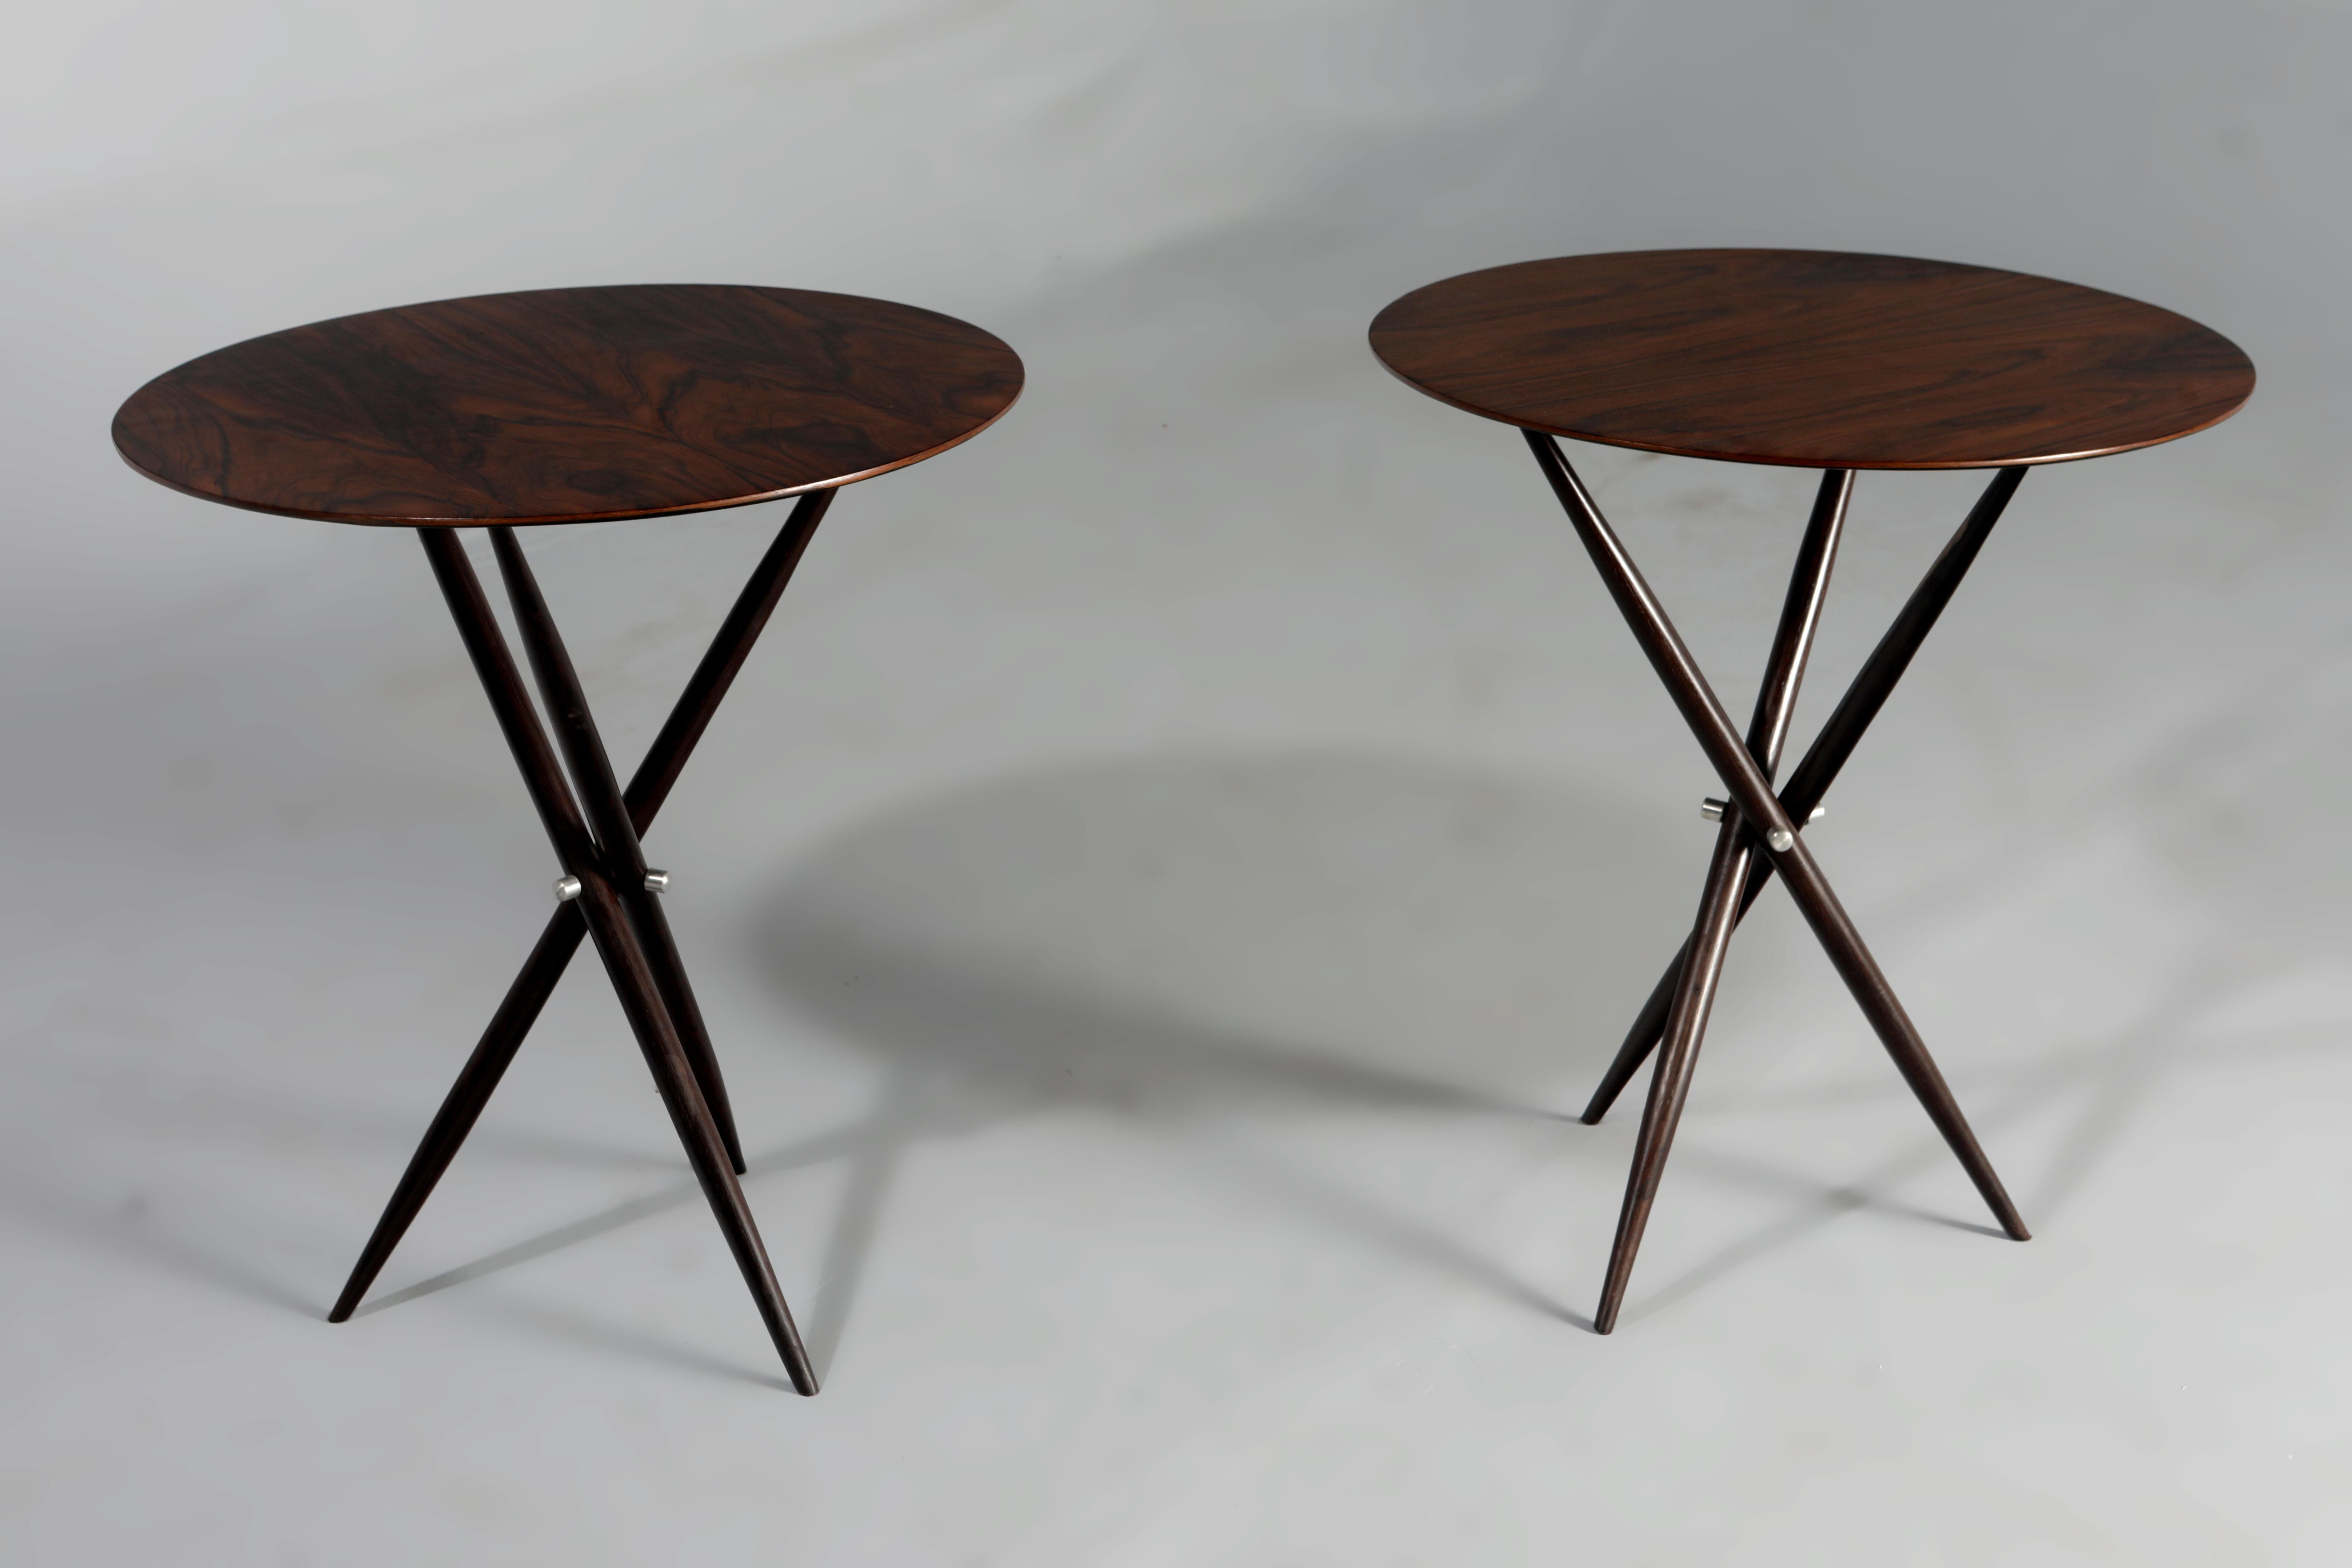 Mid-Century Modern Pair of Janete side tables by Sergio Rodrigues, Brazil, 1950s.

The Janete side tables, designed by Sergio Rodrigues, have a simple yet elegant design and capture the essence of Brazilian modernist style. Made of solid wood, the